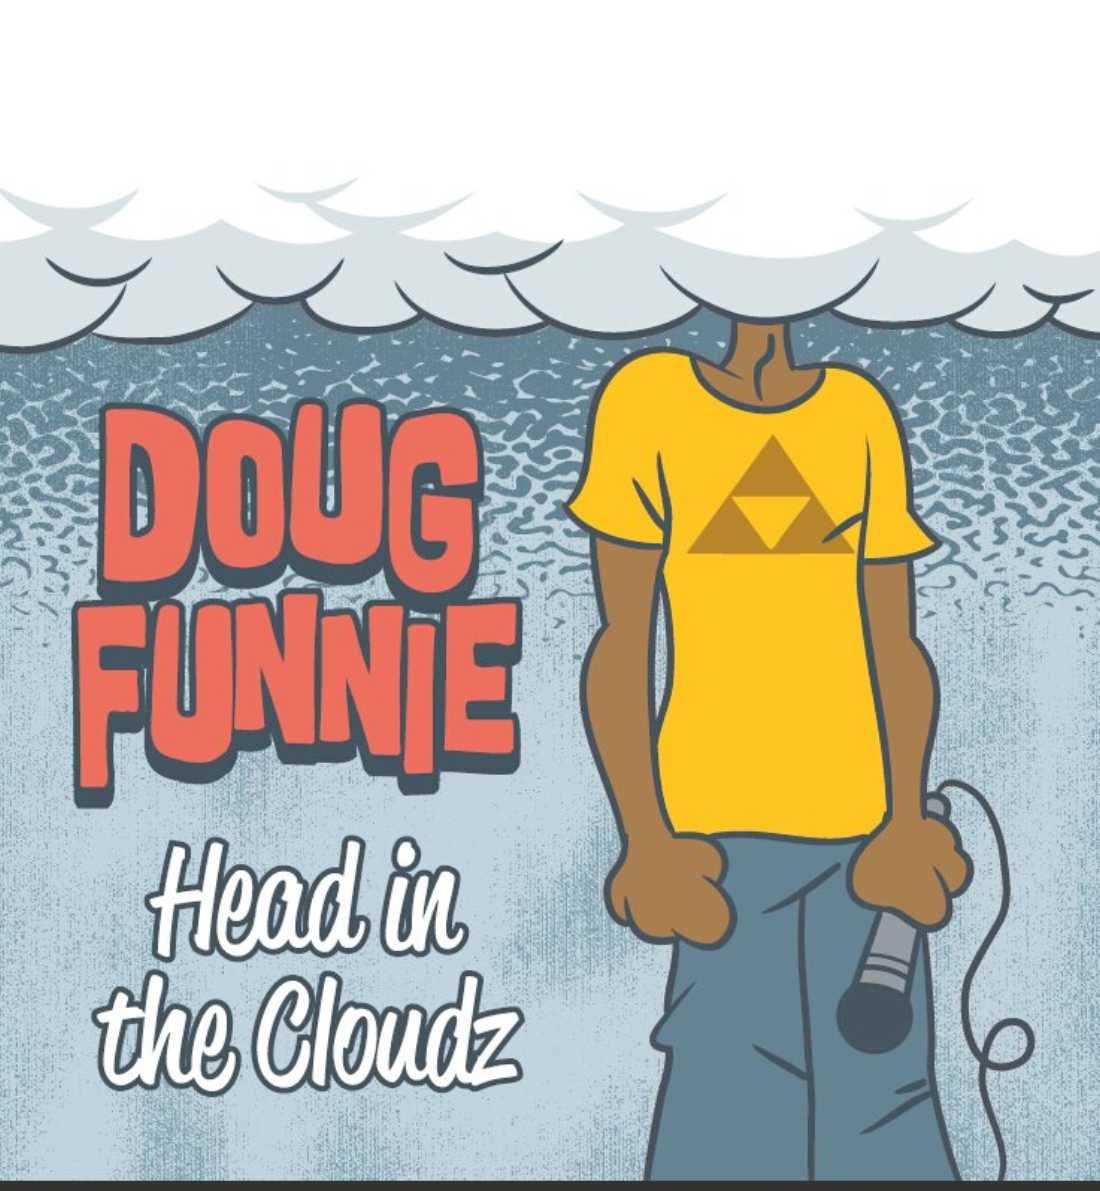 Tarrant County rapper Doug Funnie's new album is poised to make him the nerdcore king. Locally, of course.